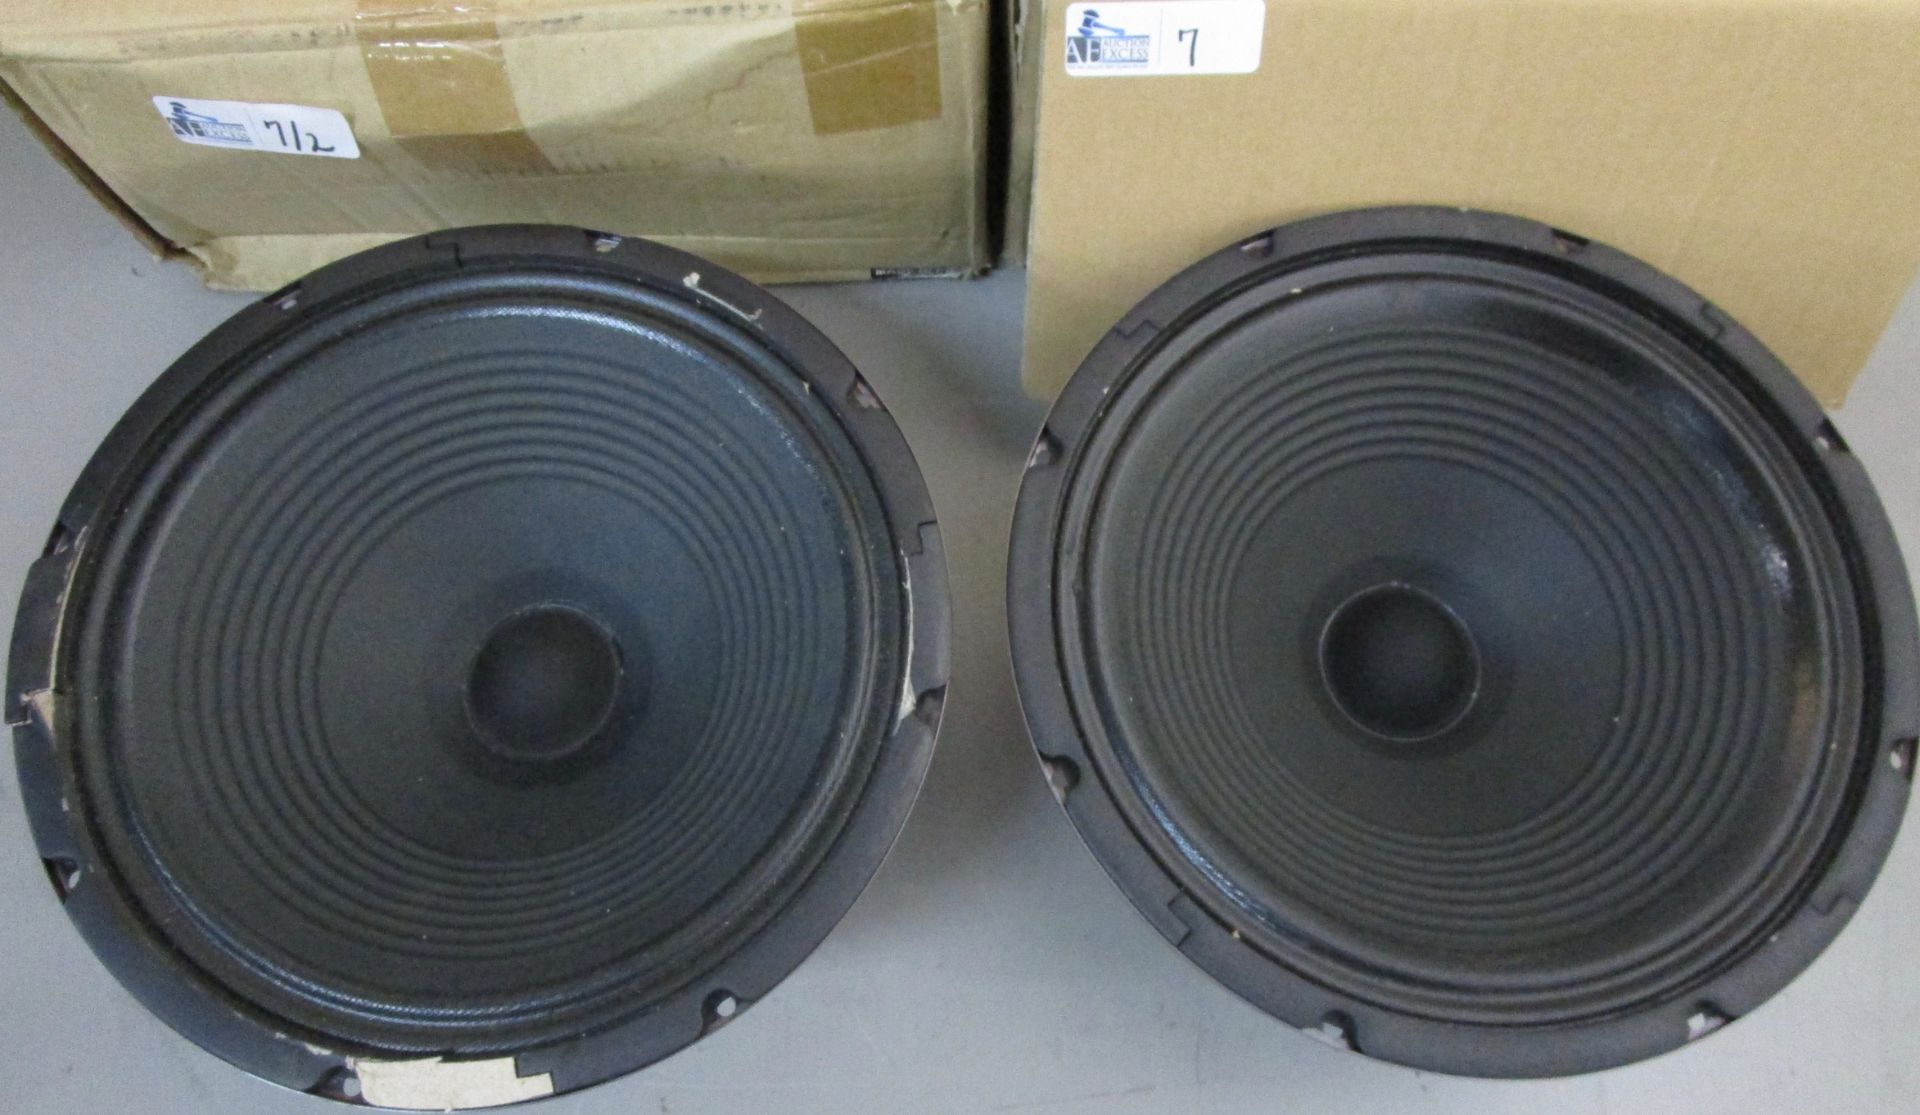 LOT OF 2 WHARFDALE WMI-G1270C-8